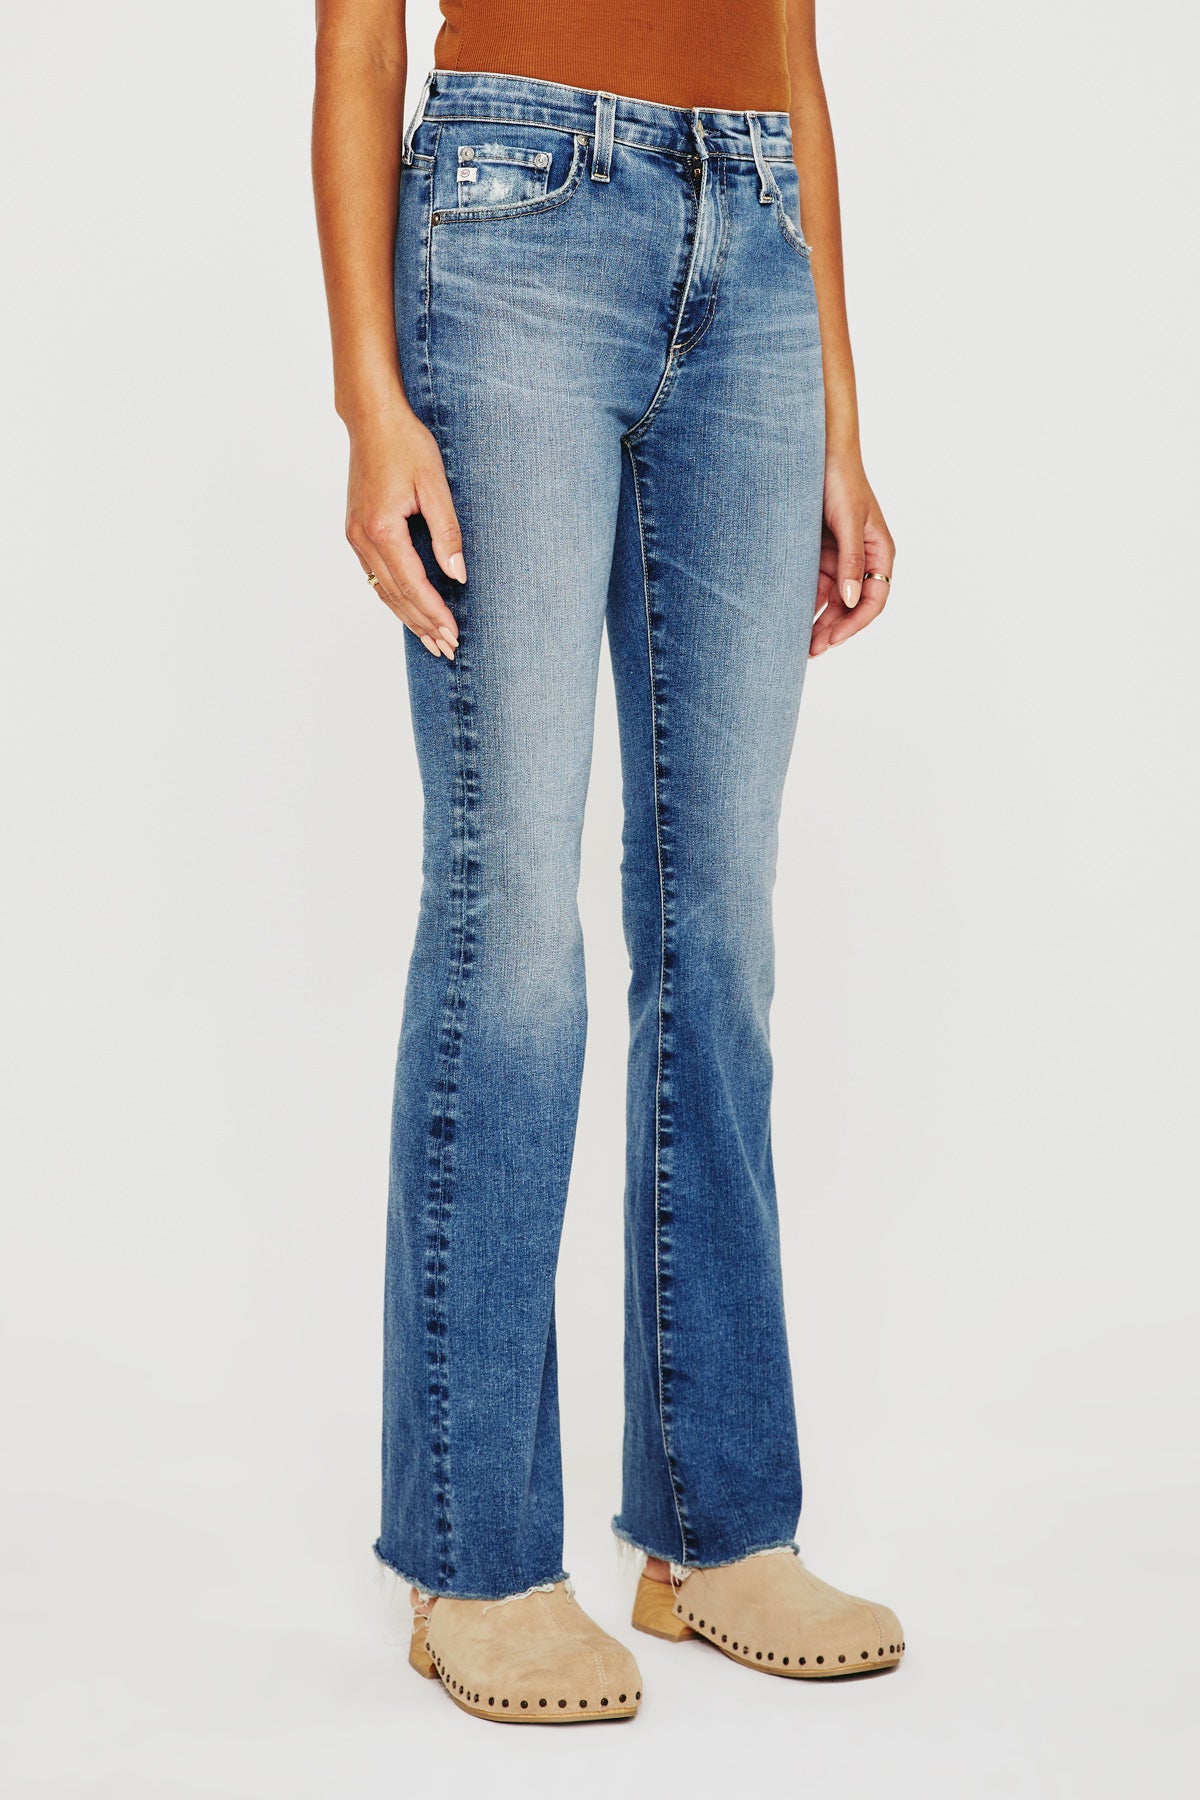 ag jeans farrah high rise boot cut jean in 14 years intentional blue, front view